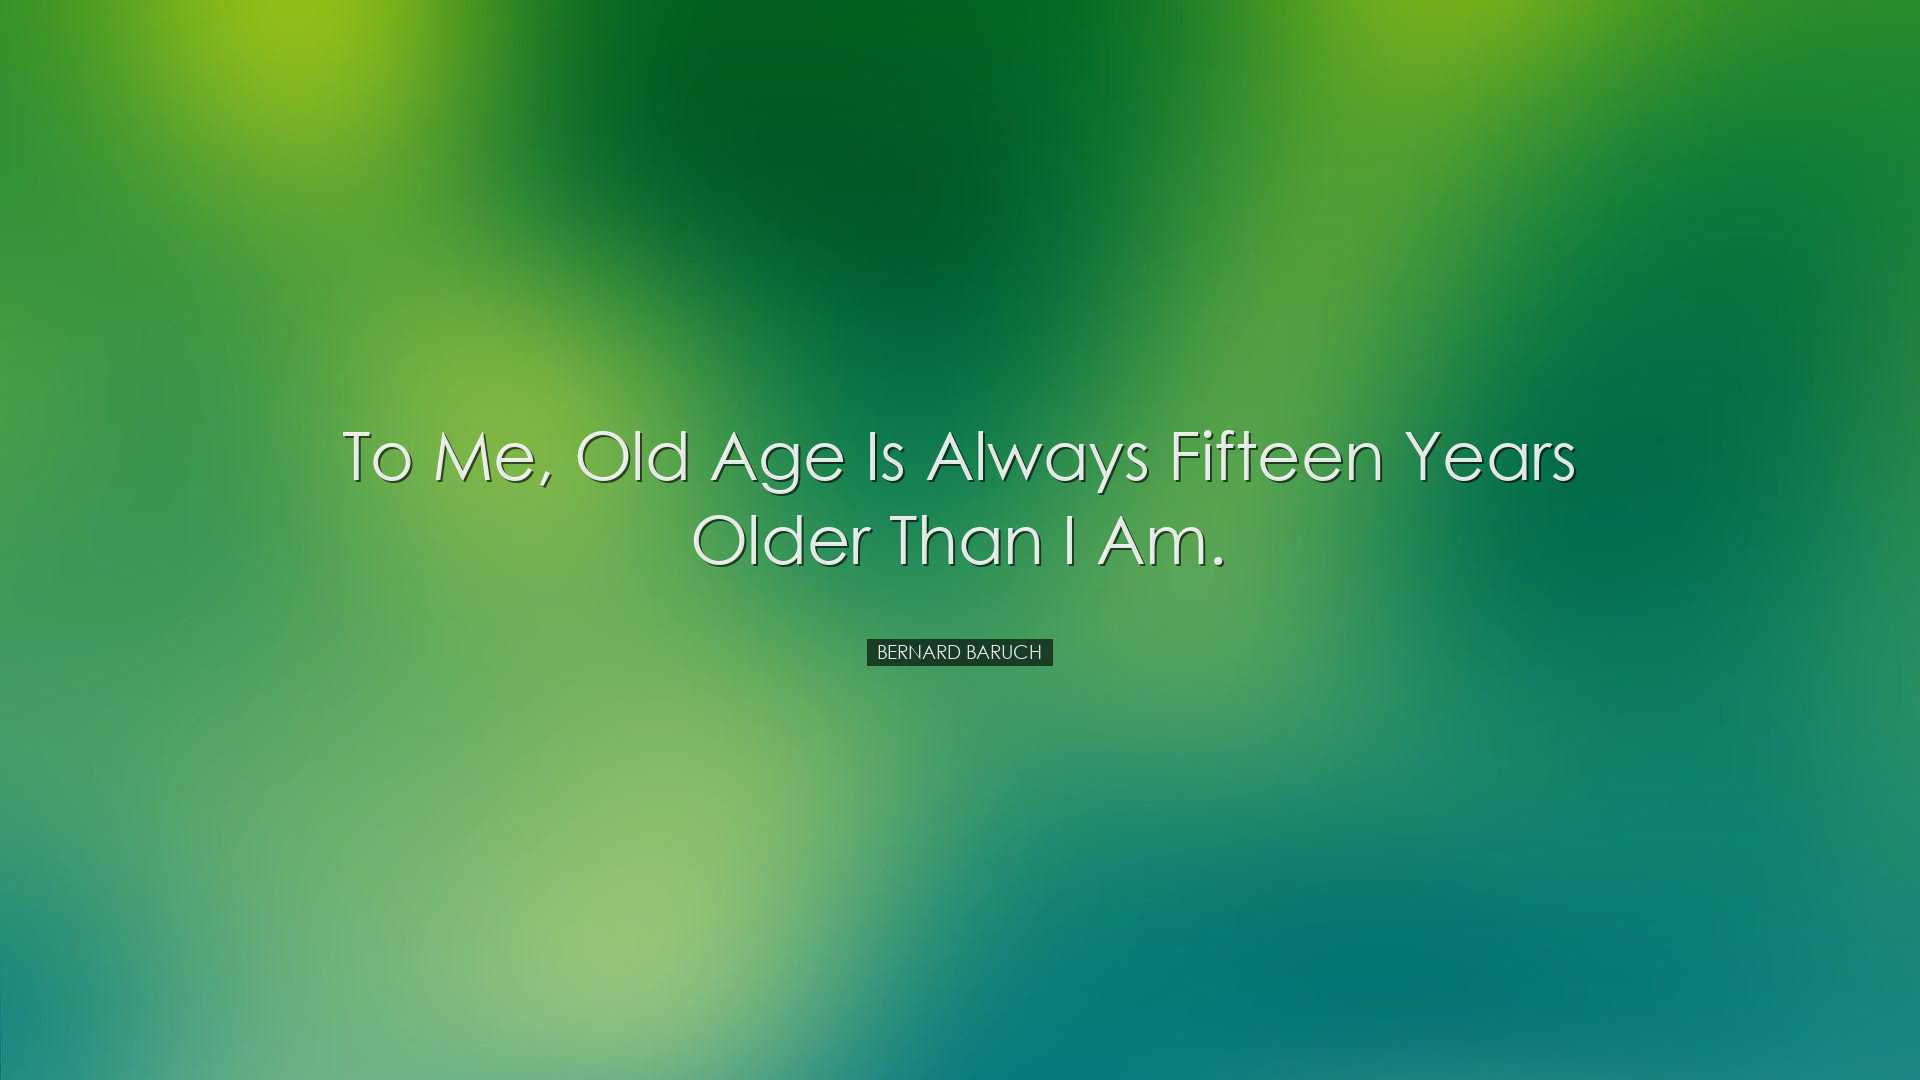 To me, old age is always fifteen years older than I am. - Bernard